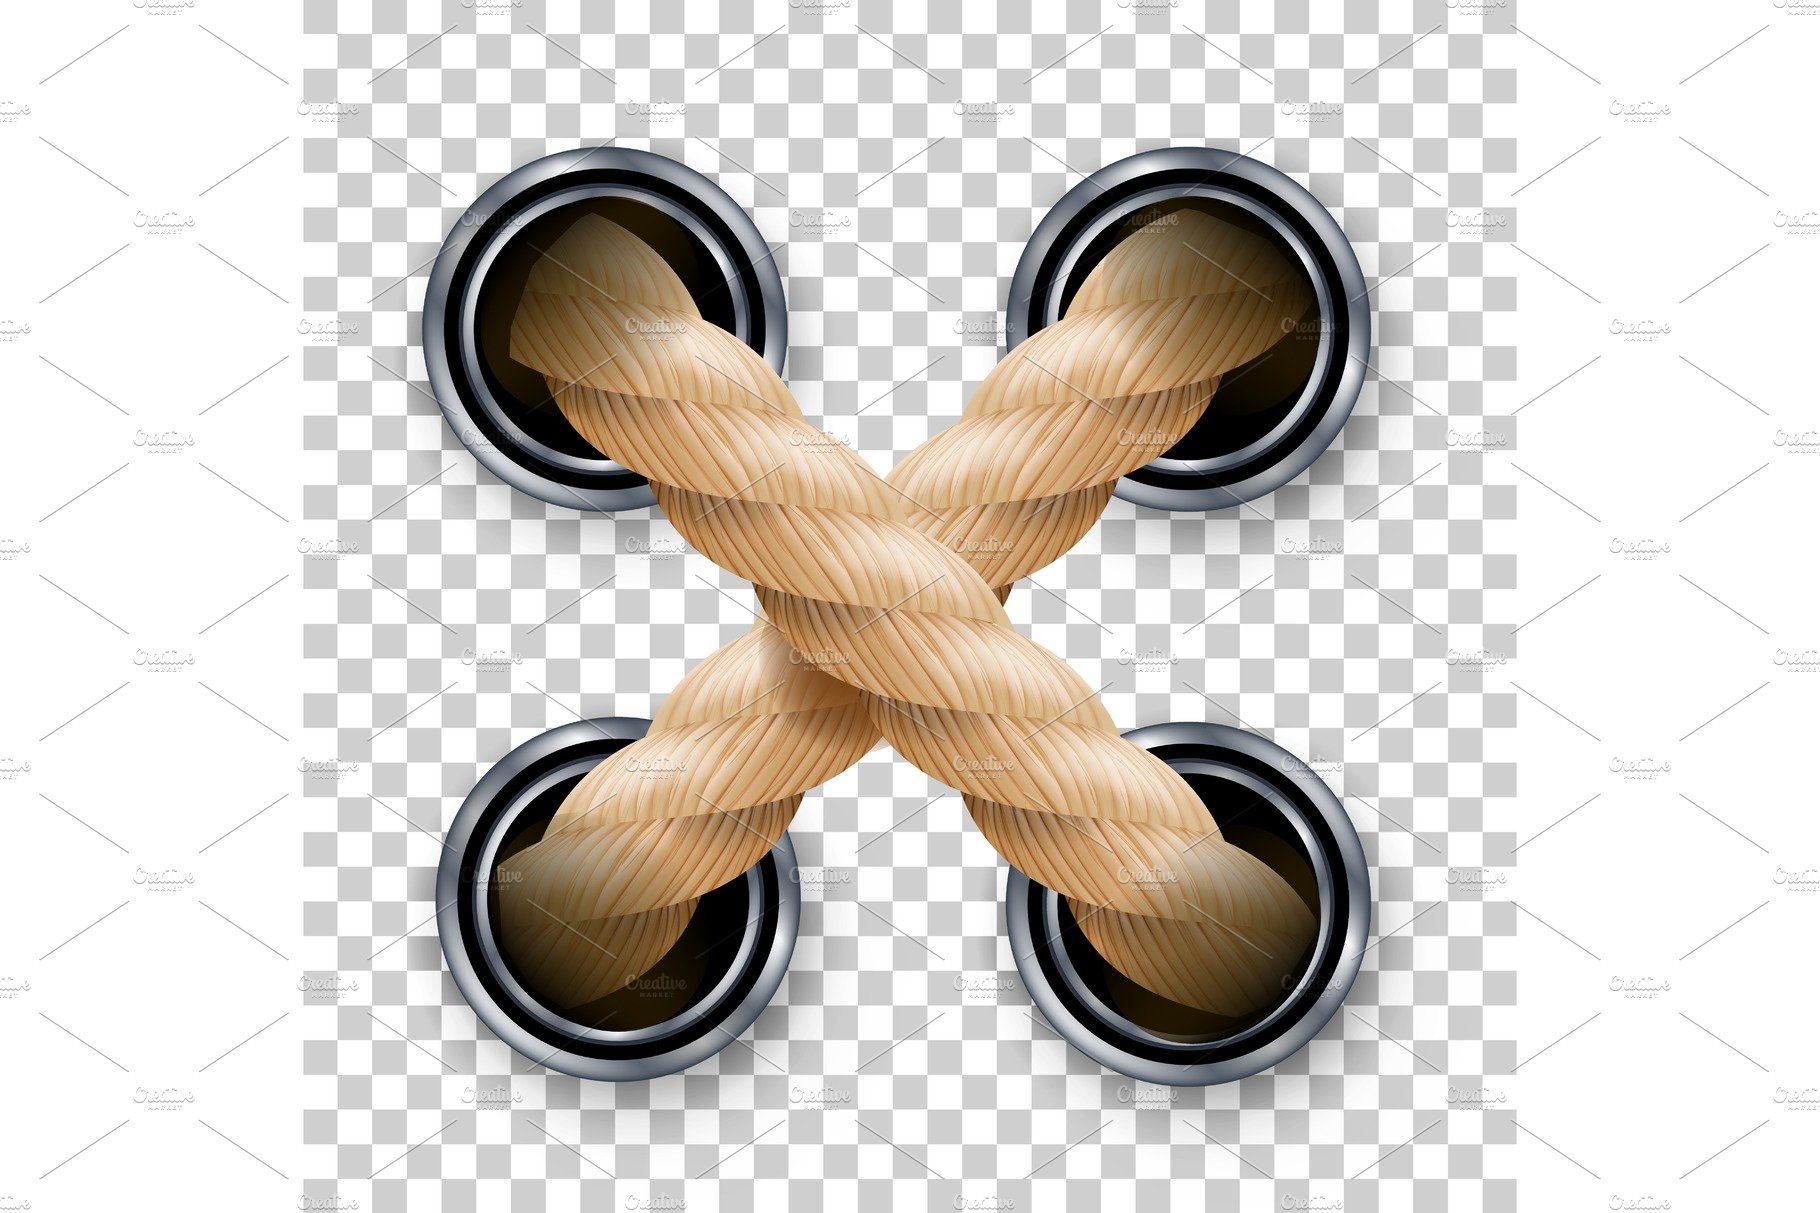 Cross Ropes Or Strings With Metallic cover image.